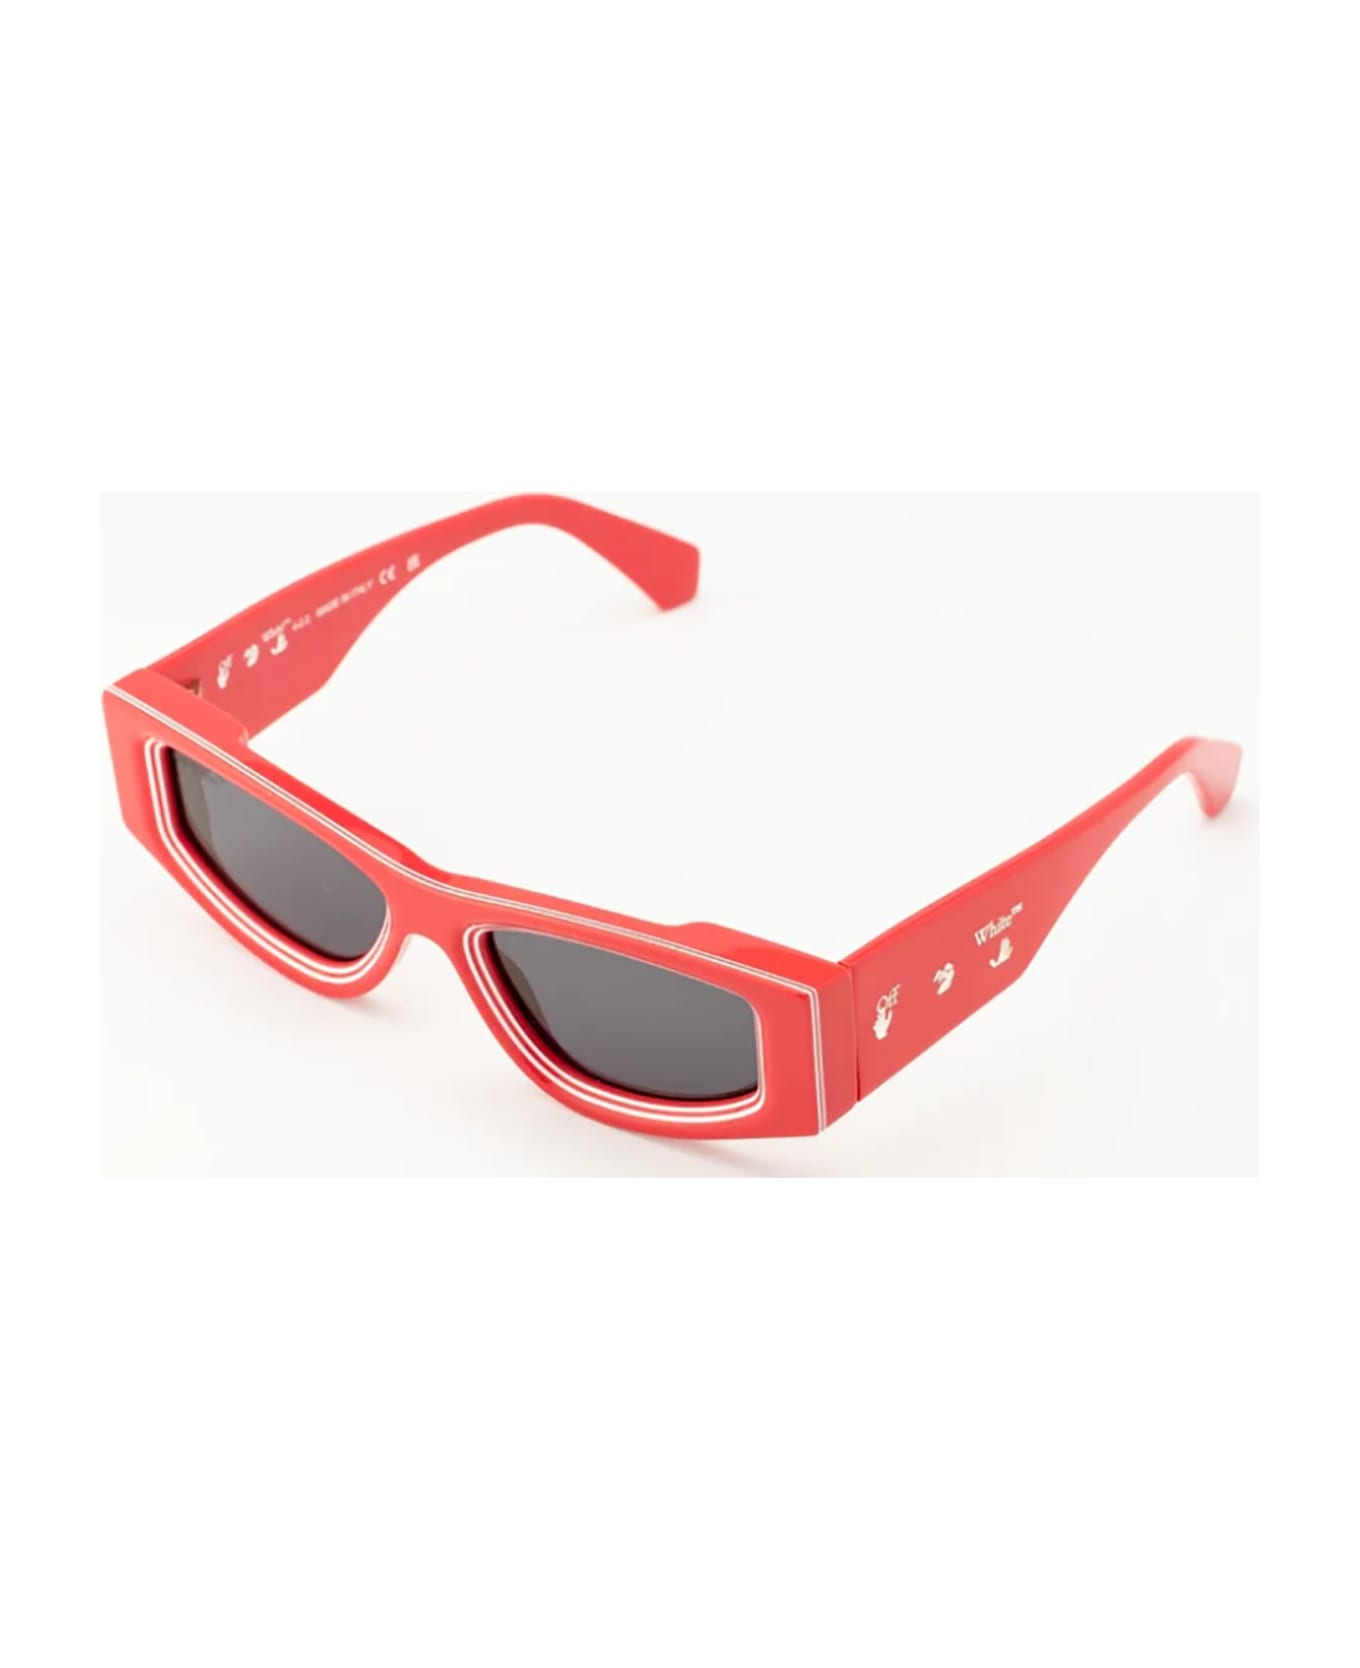 Off-White ANDY SUNGLASSES Sunglasses - Red